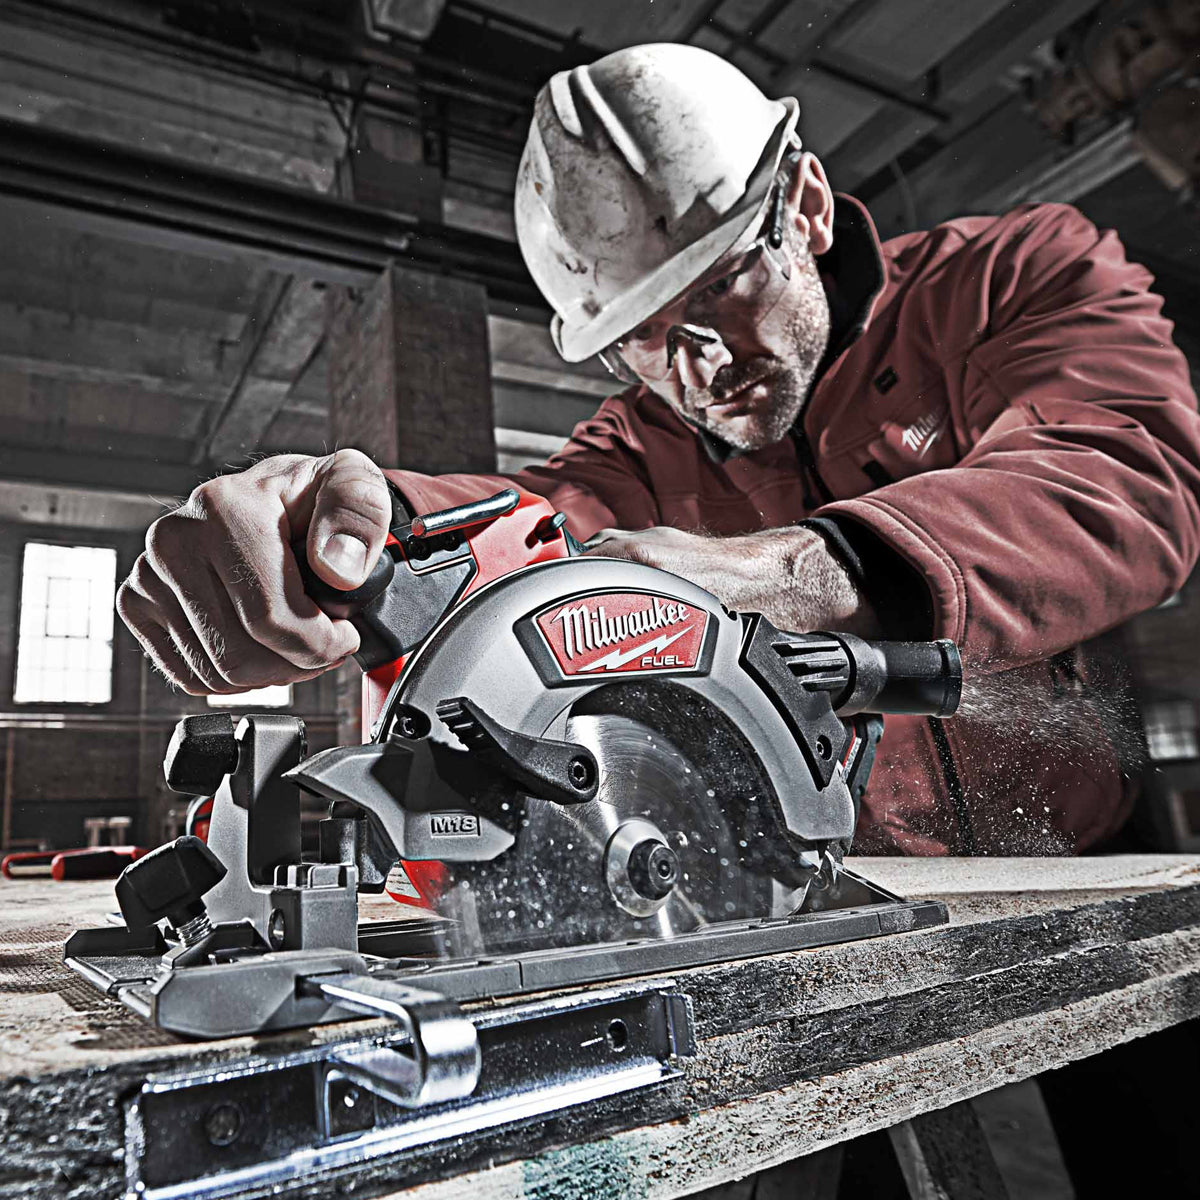 Milwaukee M18CCS55-0 18V M18 Fuel Brushless 165mm Circular Saw Body Only